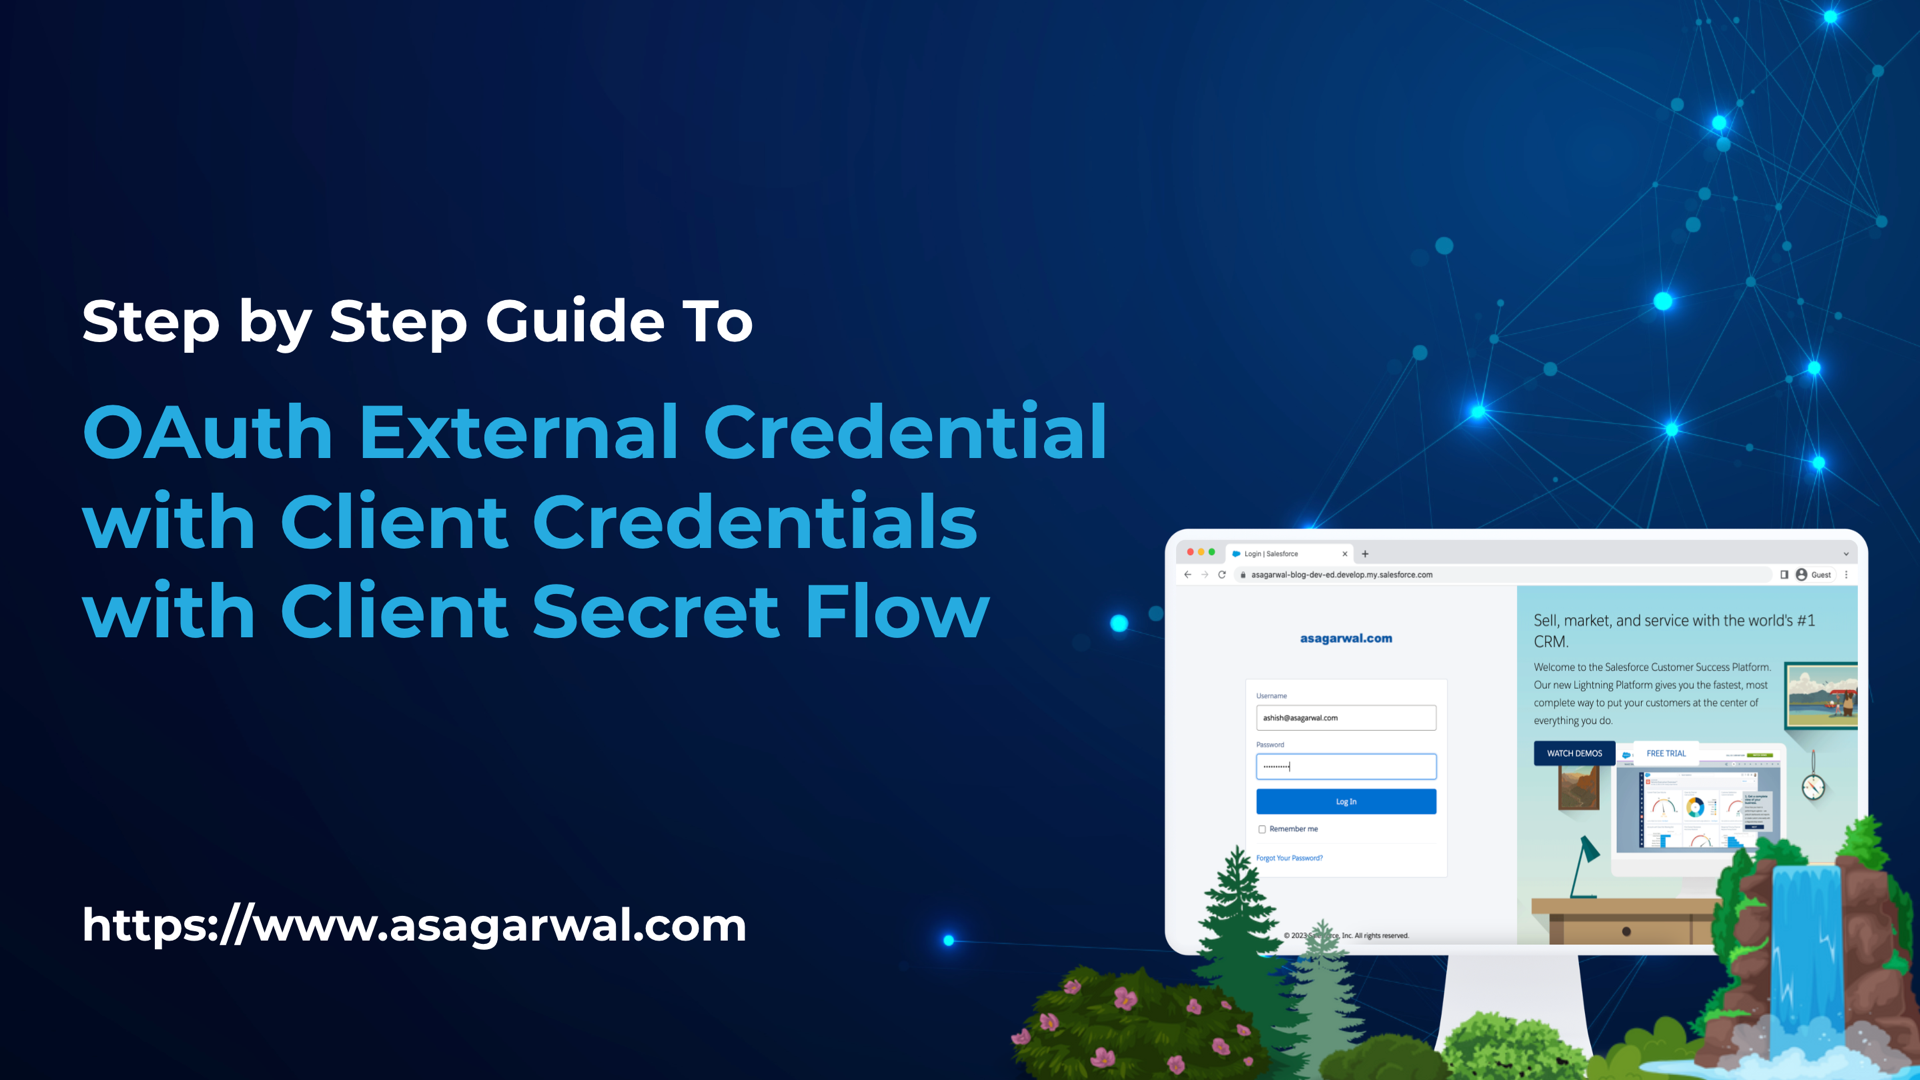 Step by Step Guide To OAuth External Credential with Client Credentials with Client Secret Flow